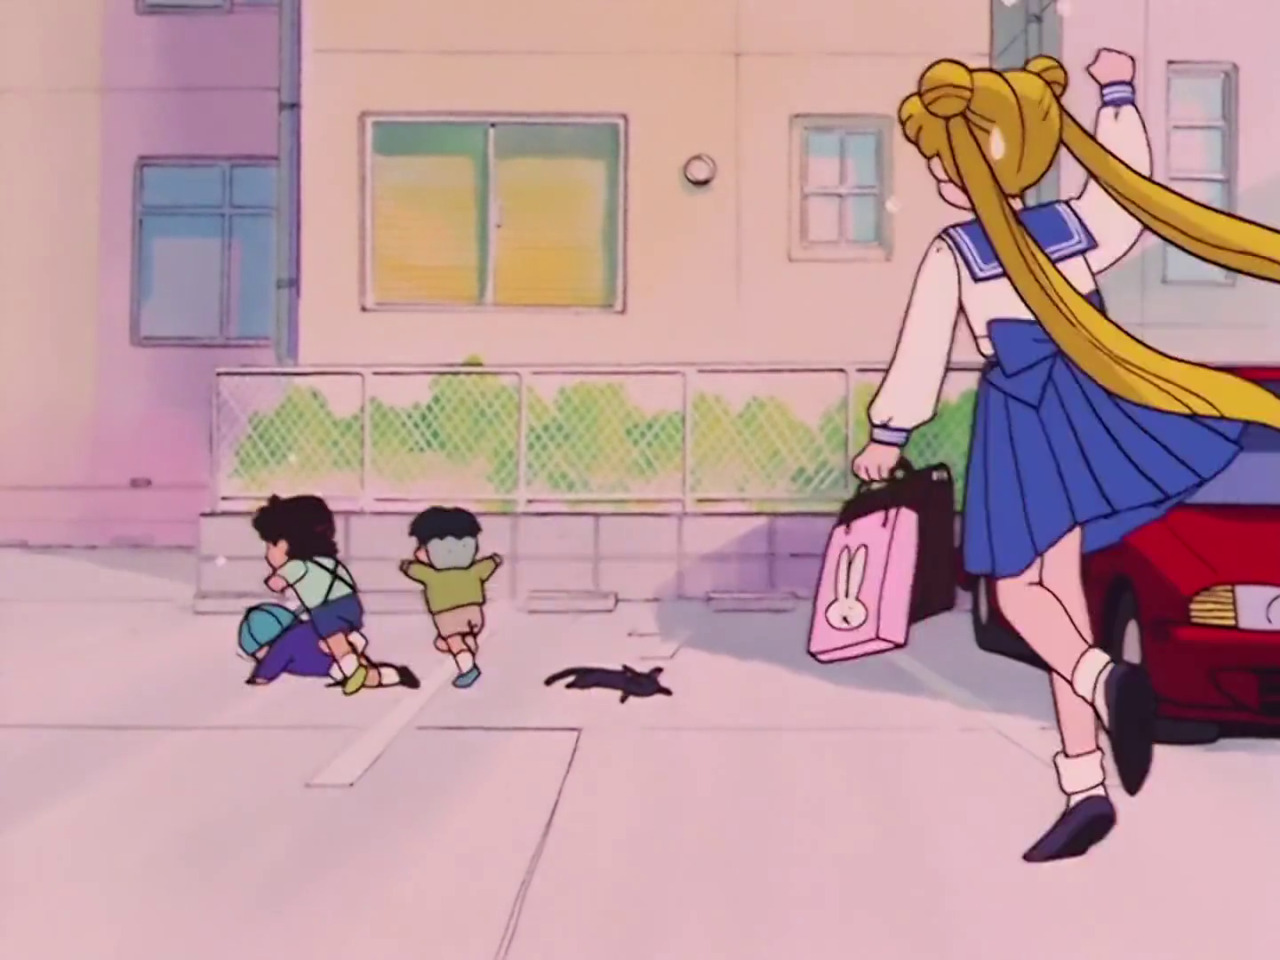 I love how the 90s anime aged up Mamoru a bit just to bully him